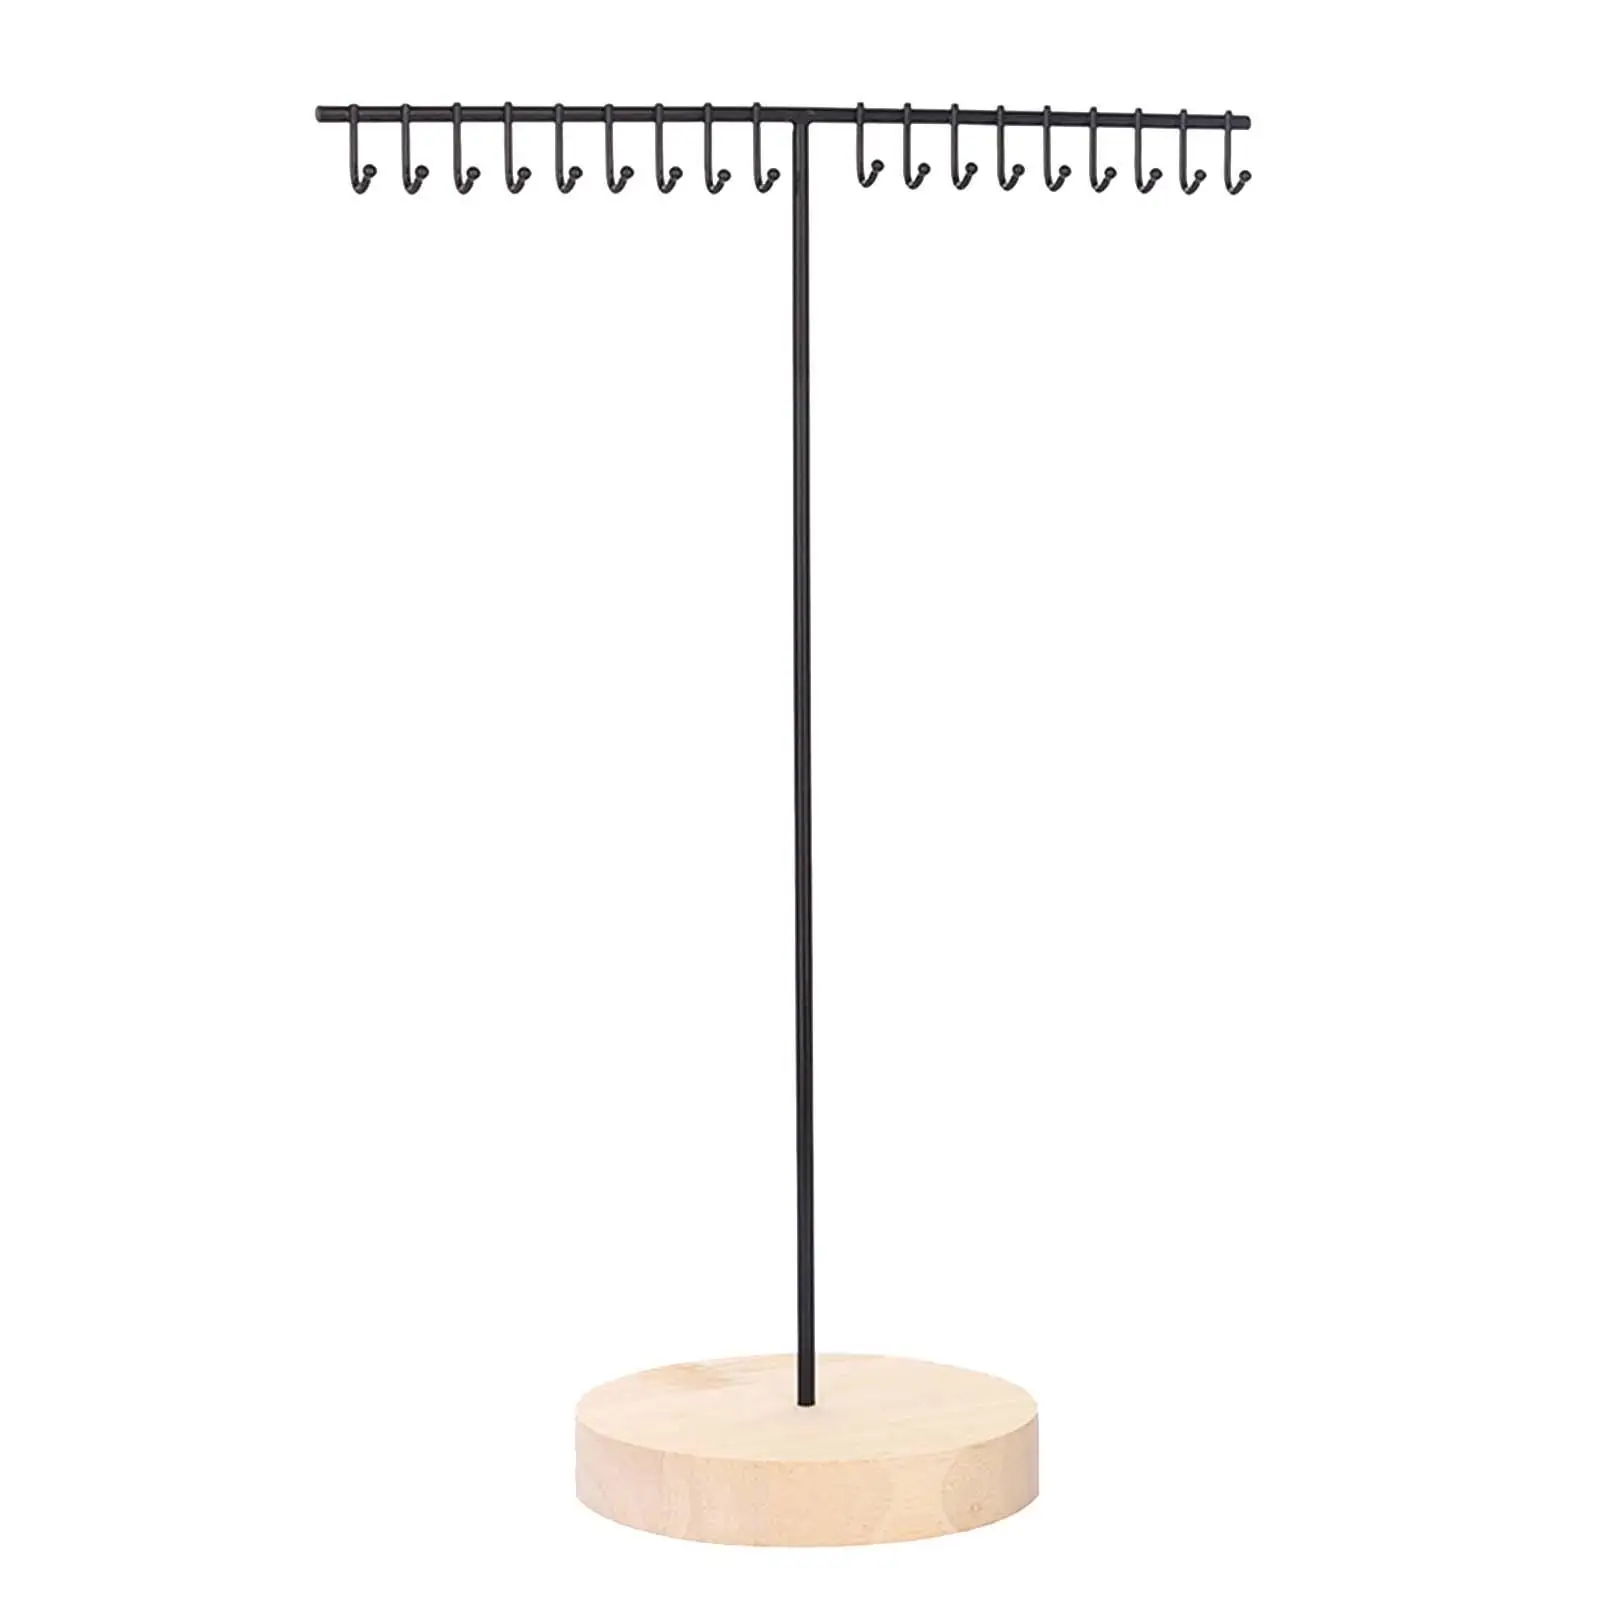 T Bar Jewelry Display Stand with 18 Hooks Free Standing Organizer Jewelry Display Rack Stores Countertop Dresser Tabletop Home